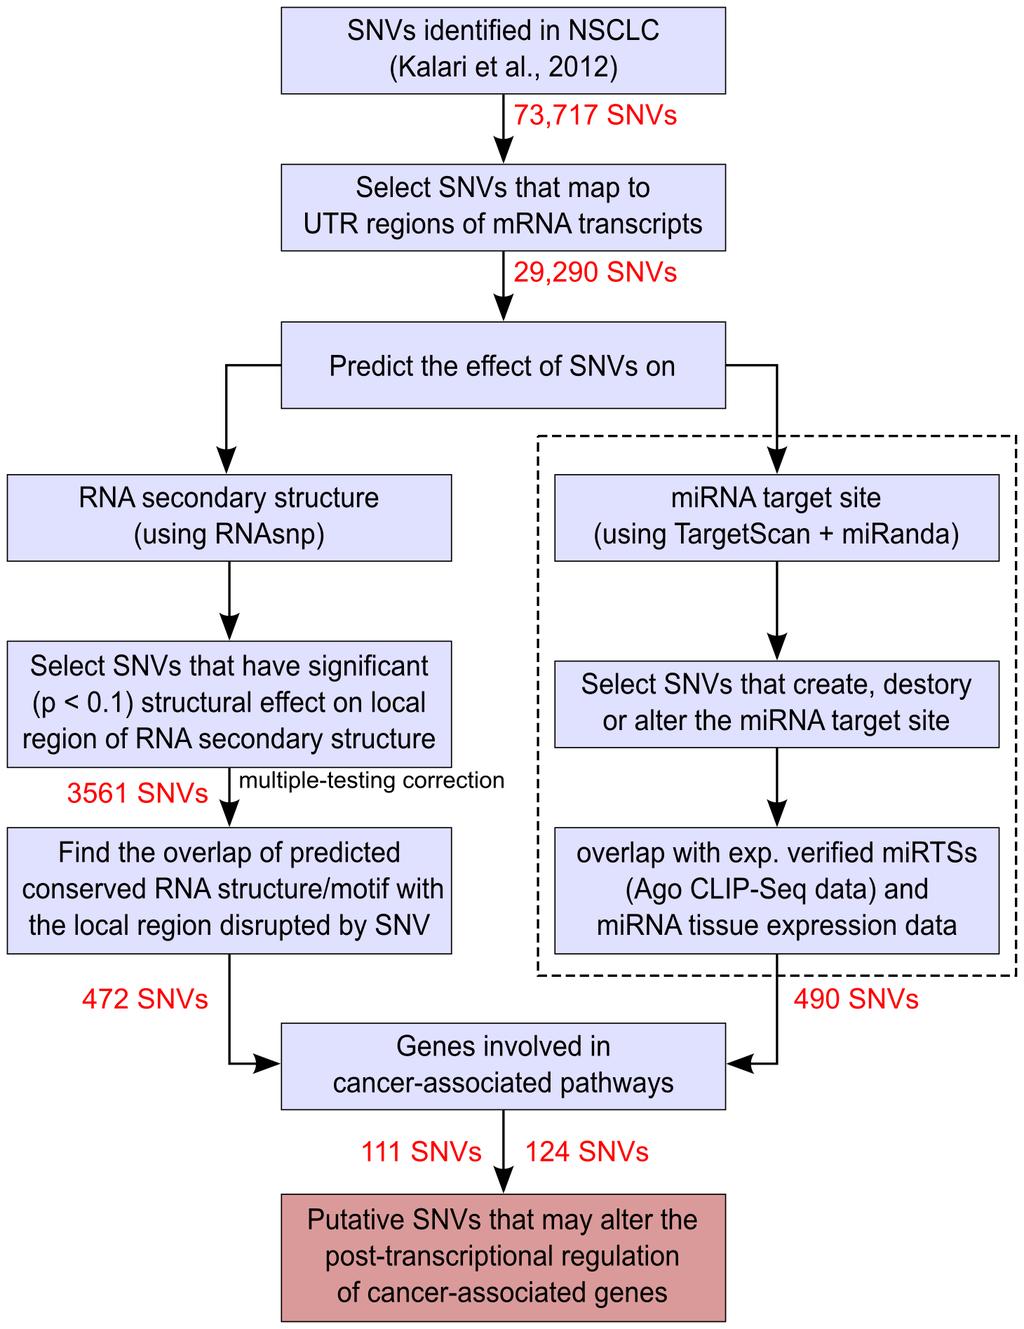 Figure 1. Pipeline for the analysis of effect of SNVs on UTRs of mrna. doi:10.1371/journal.pone.0082699.